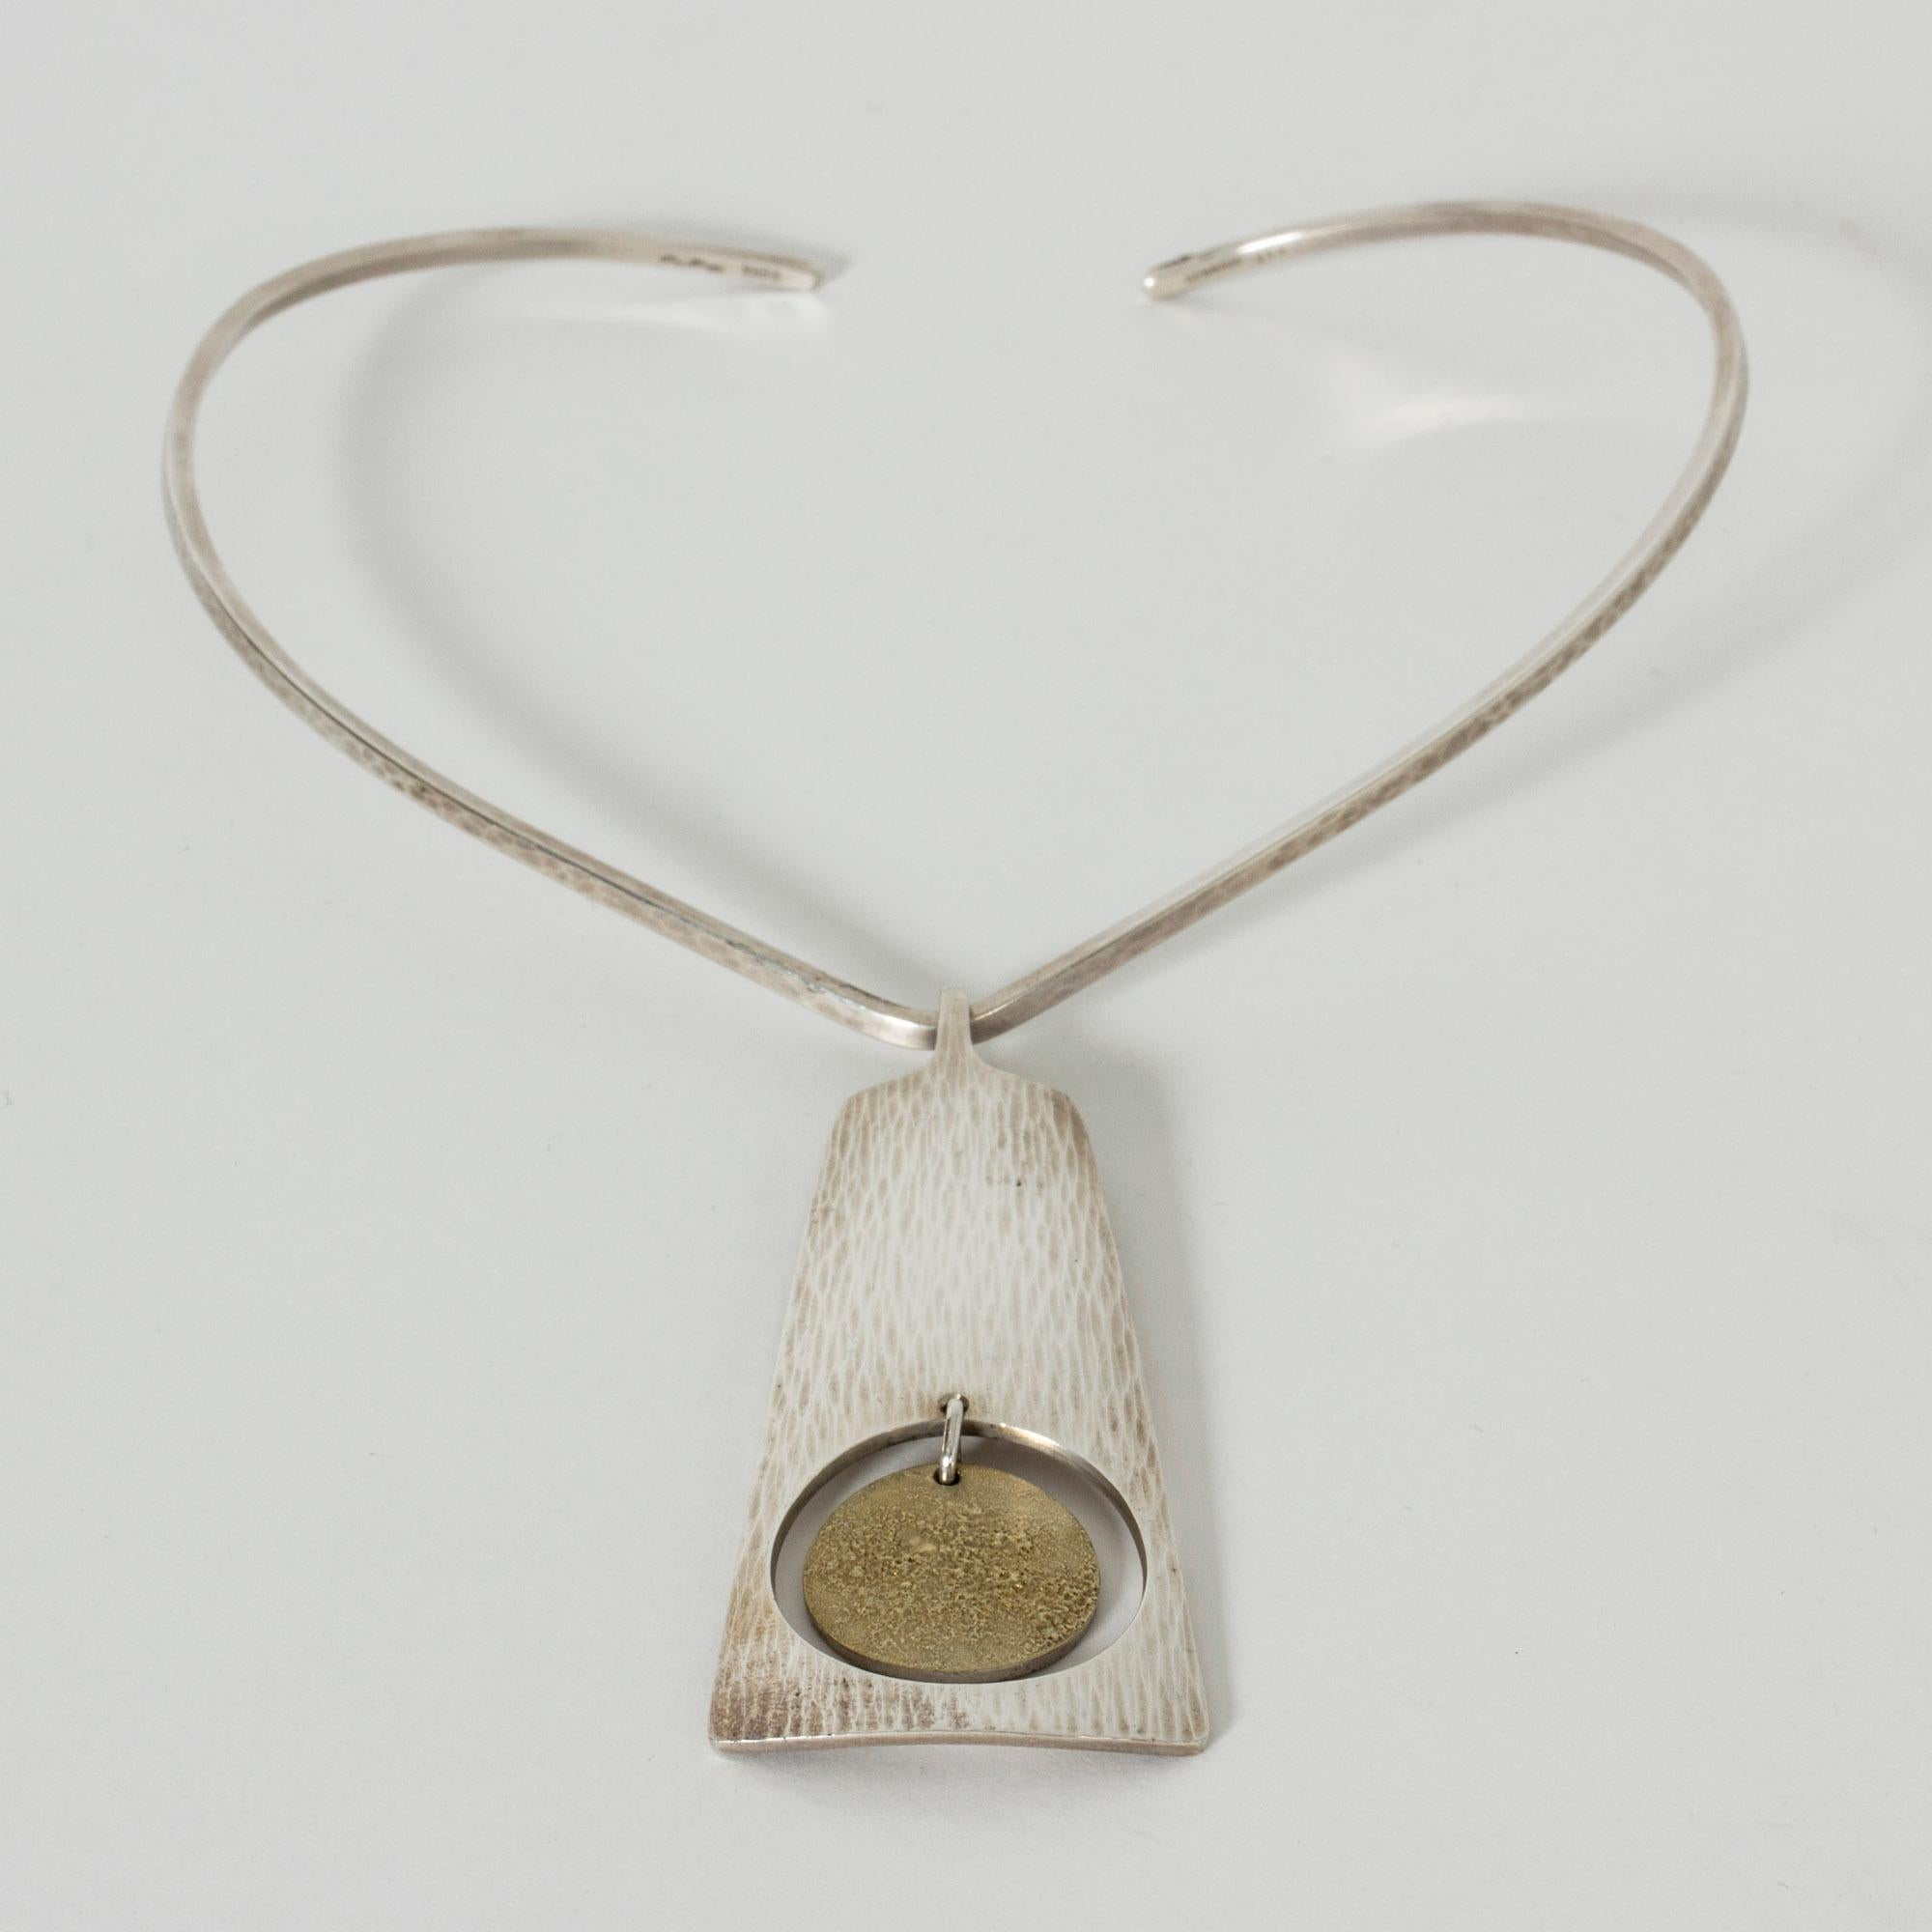 Striking silver neckring by Bent Gabrielsen Pedersen with a long pendant with a hand-hammered surface. In the cut out sphere in the middle of the pendant hangs a gilded disk with an acid treated surface that gives it a foaming look. Great contrasts,